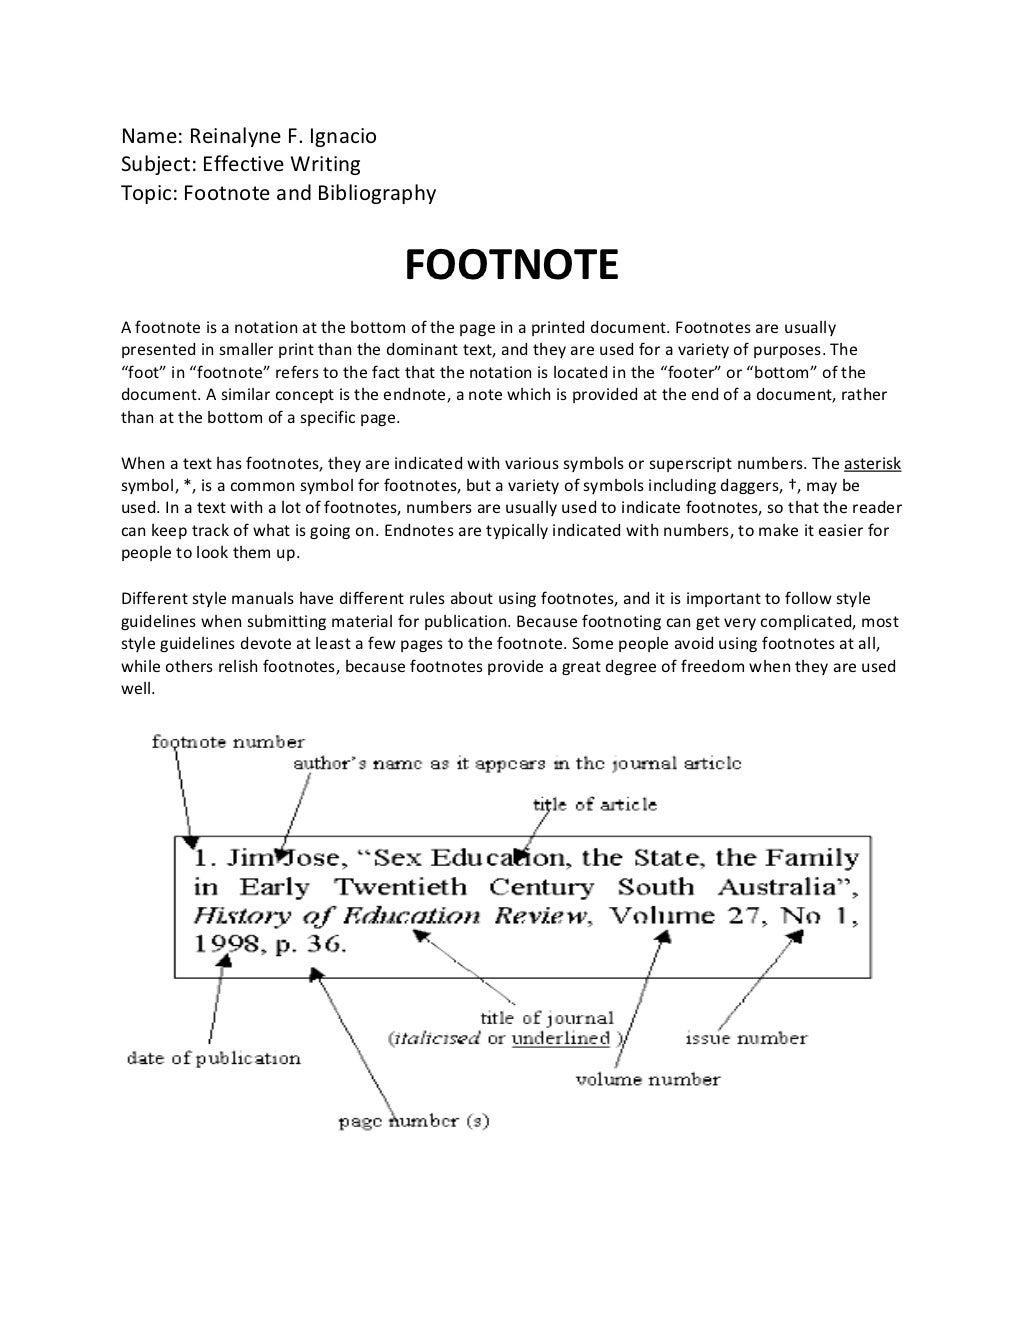 references footnotes size